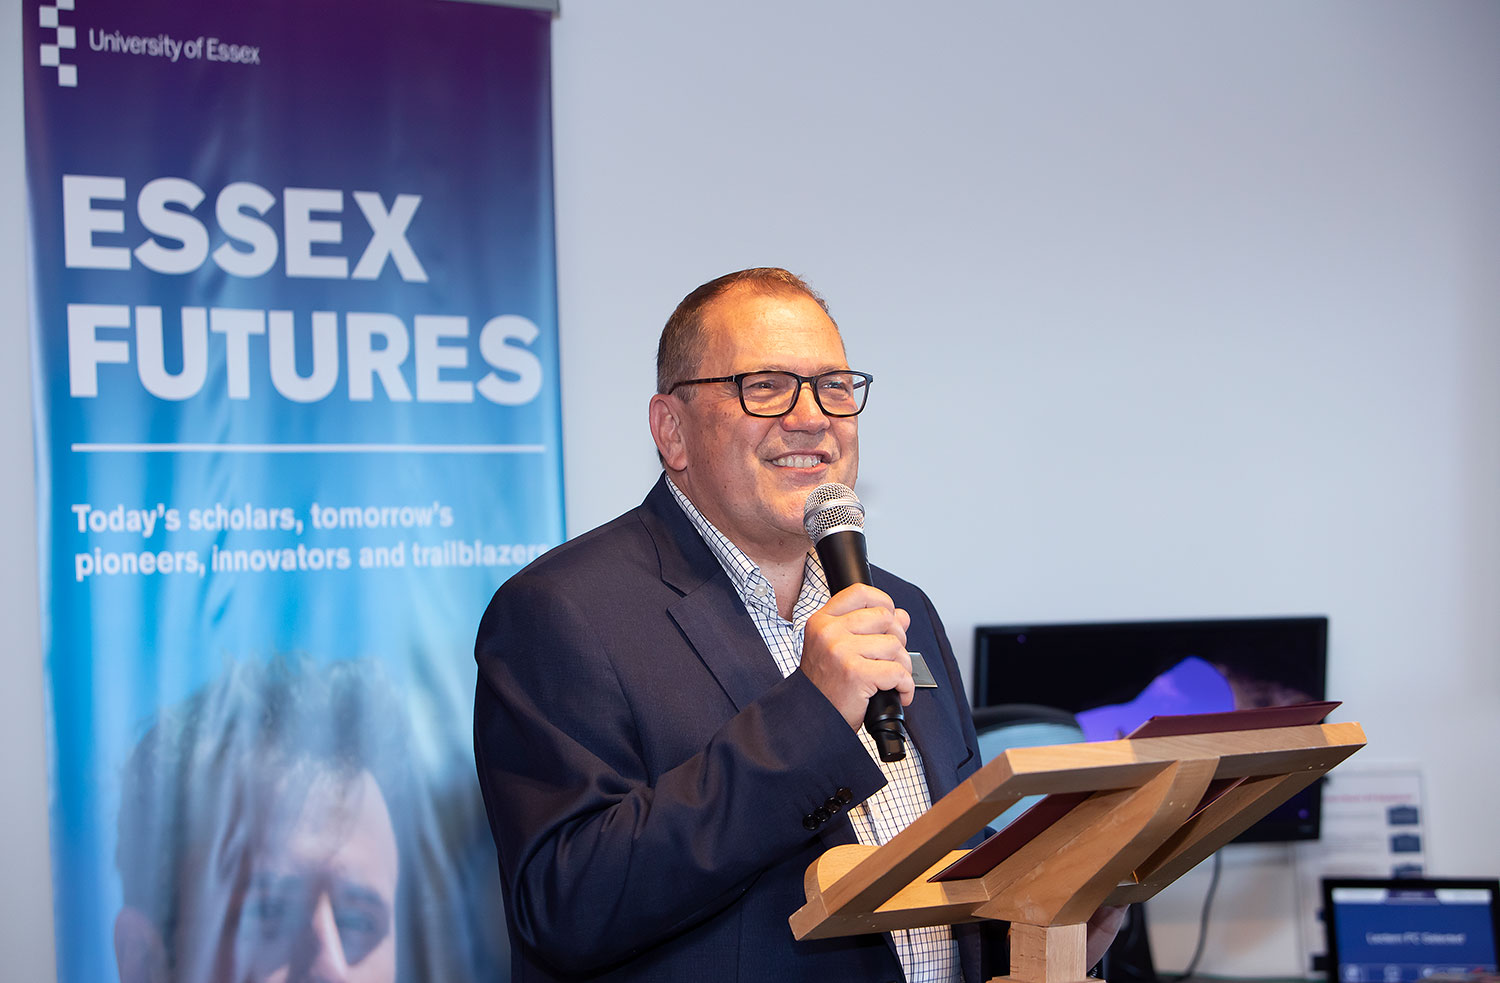 Bryn Morris speaking in front of a banner for Essex Futures.